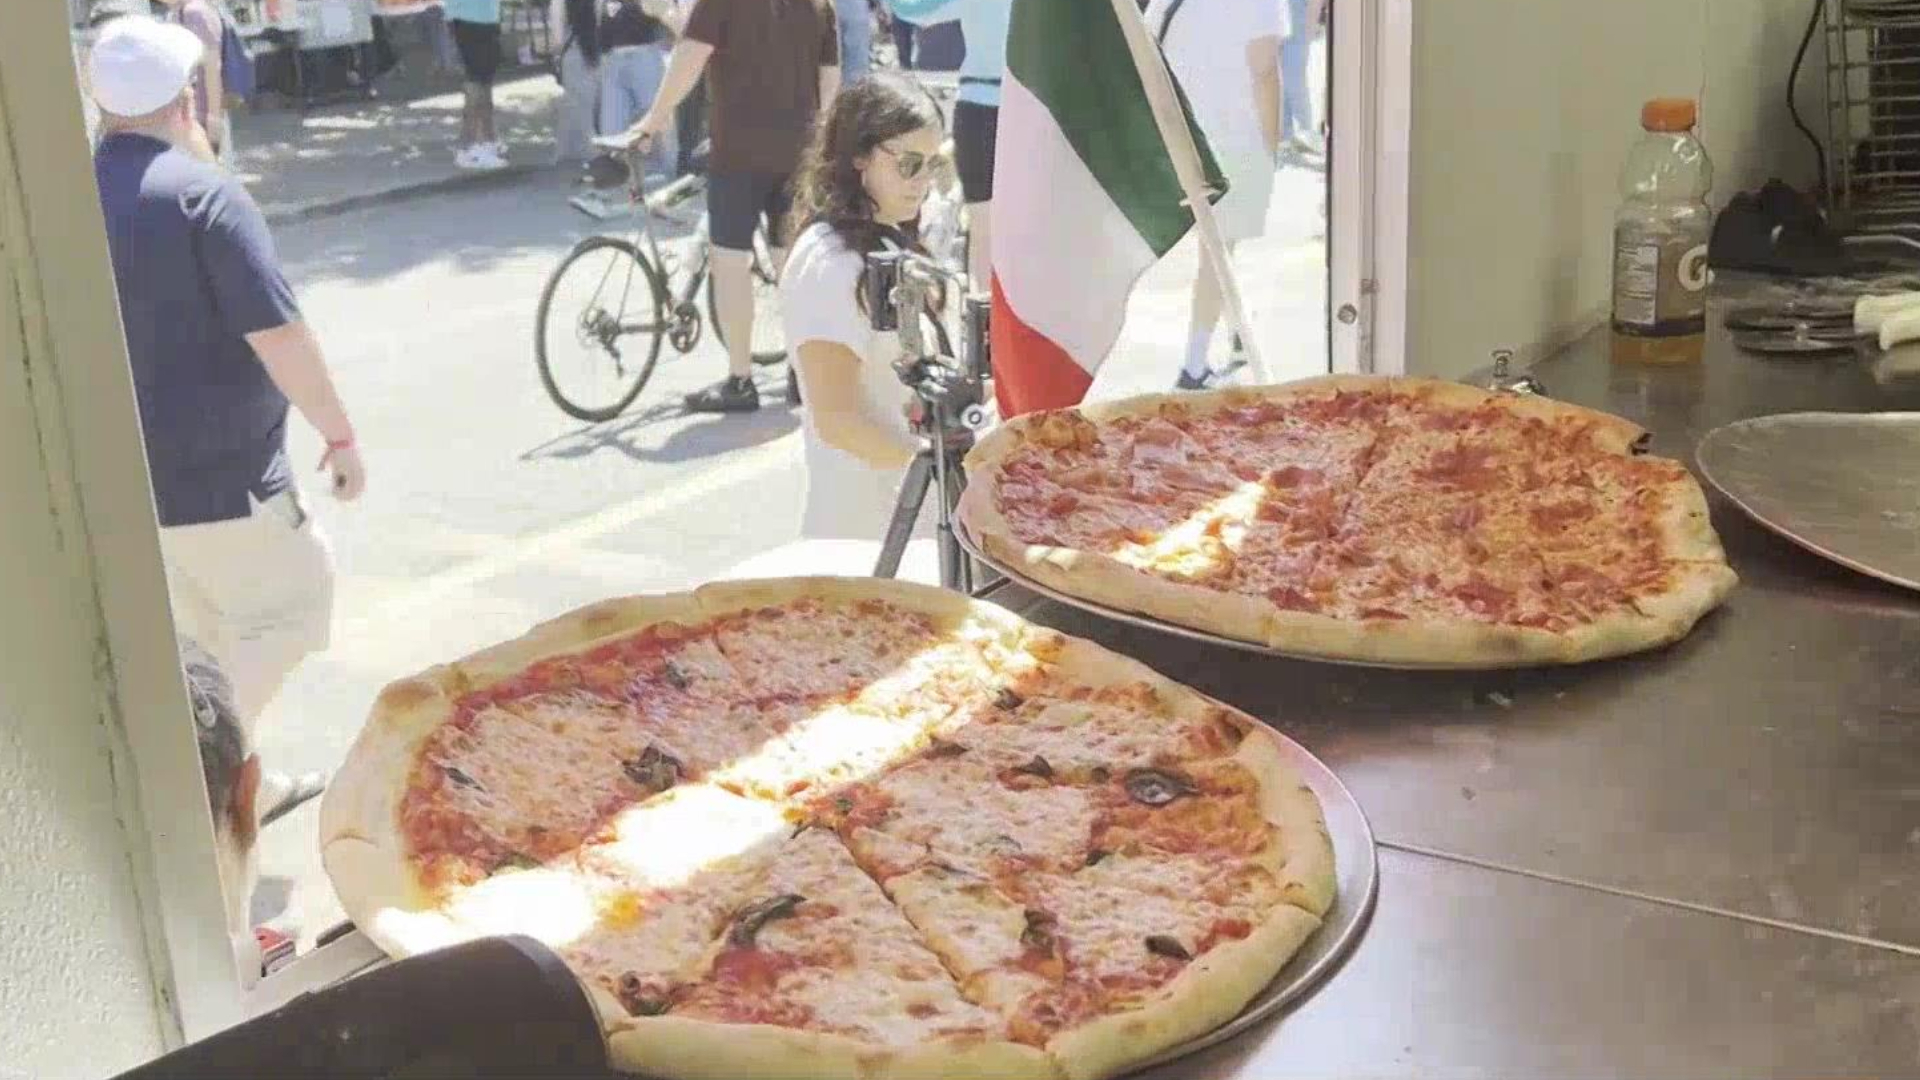 Italian Day returns to Vancouver's Commercial Drive Sunday